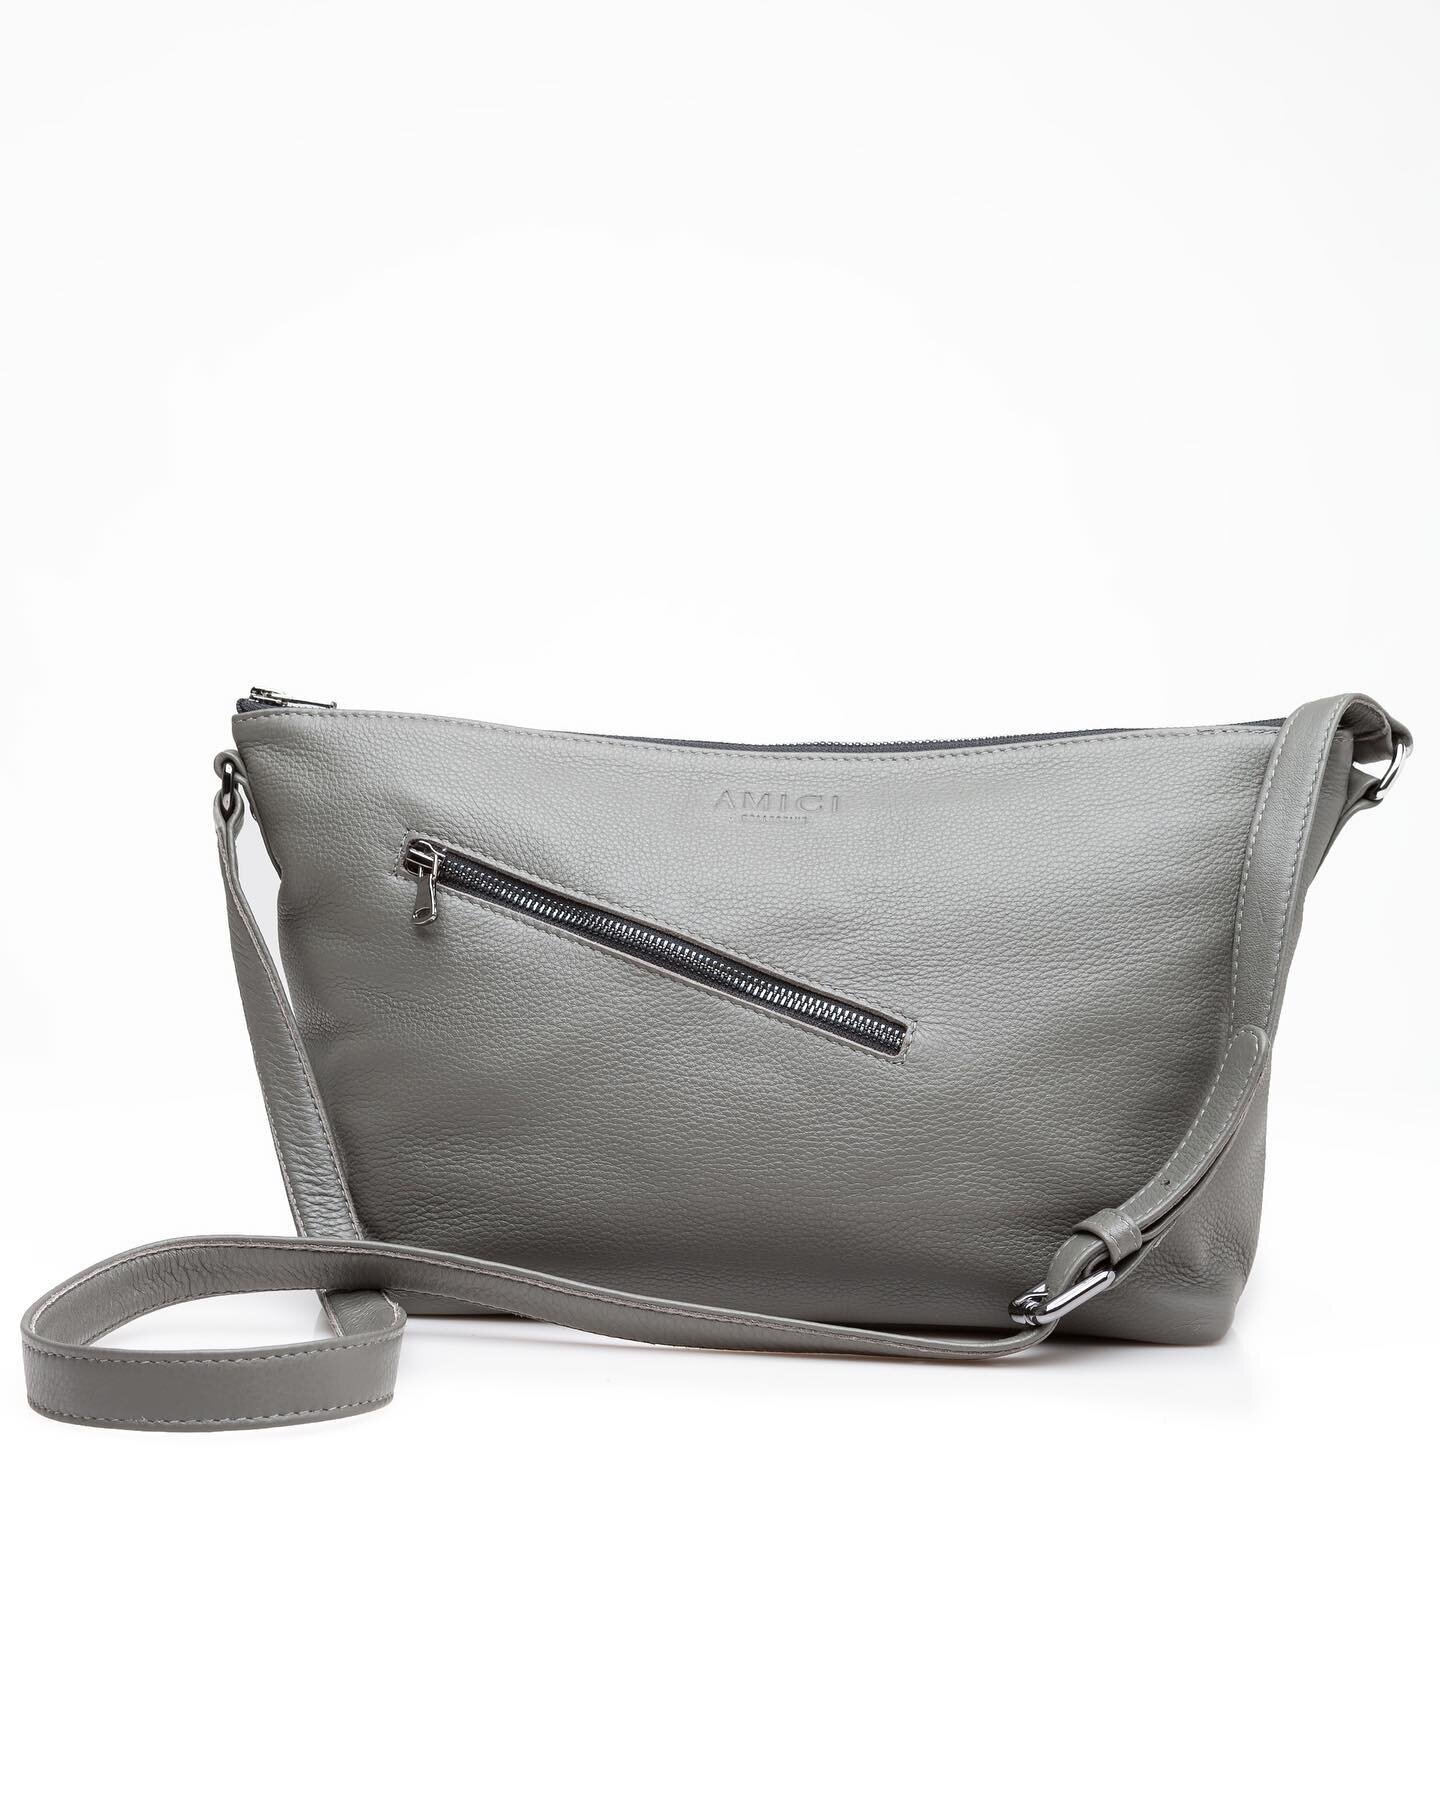 Luxe finishes and practical features combine in our best selling Wanderer Cross Body Bag. Perfectly sized with plenty of pockets to keep things organised, this baby is made for all kinds of wandering! Handmade in Australia, shop now for FREE Express 